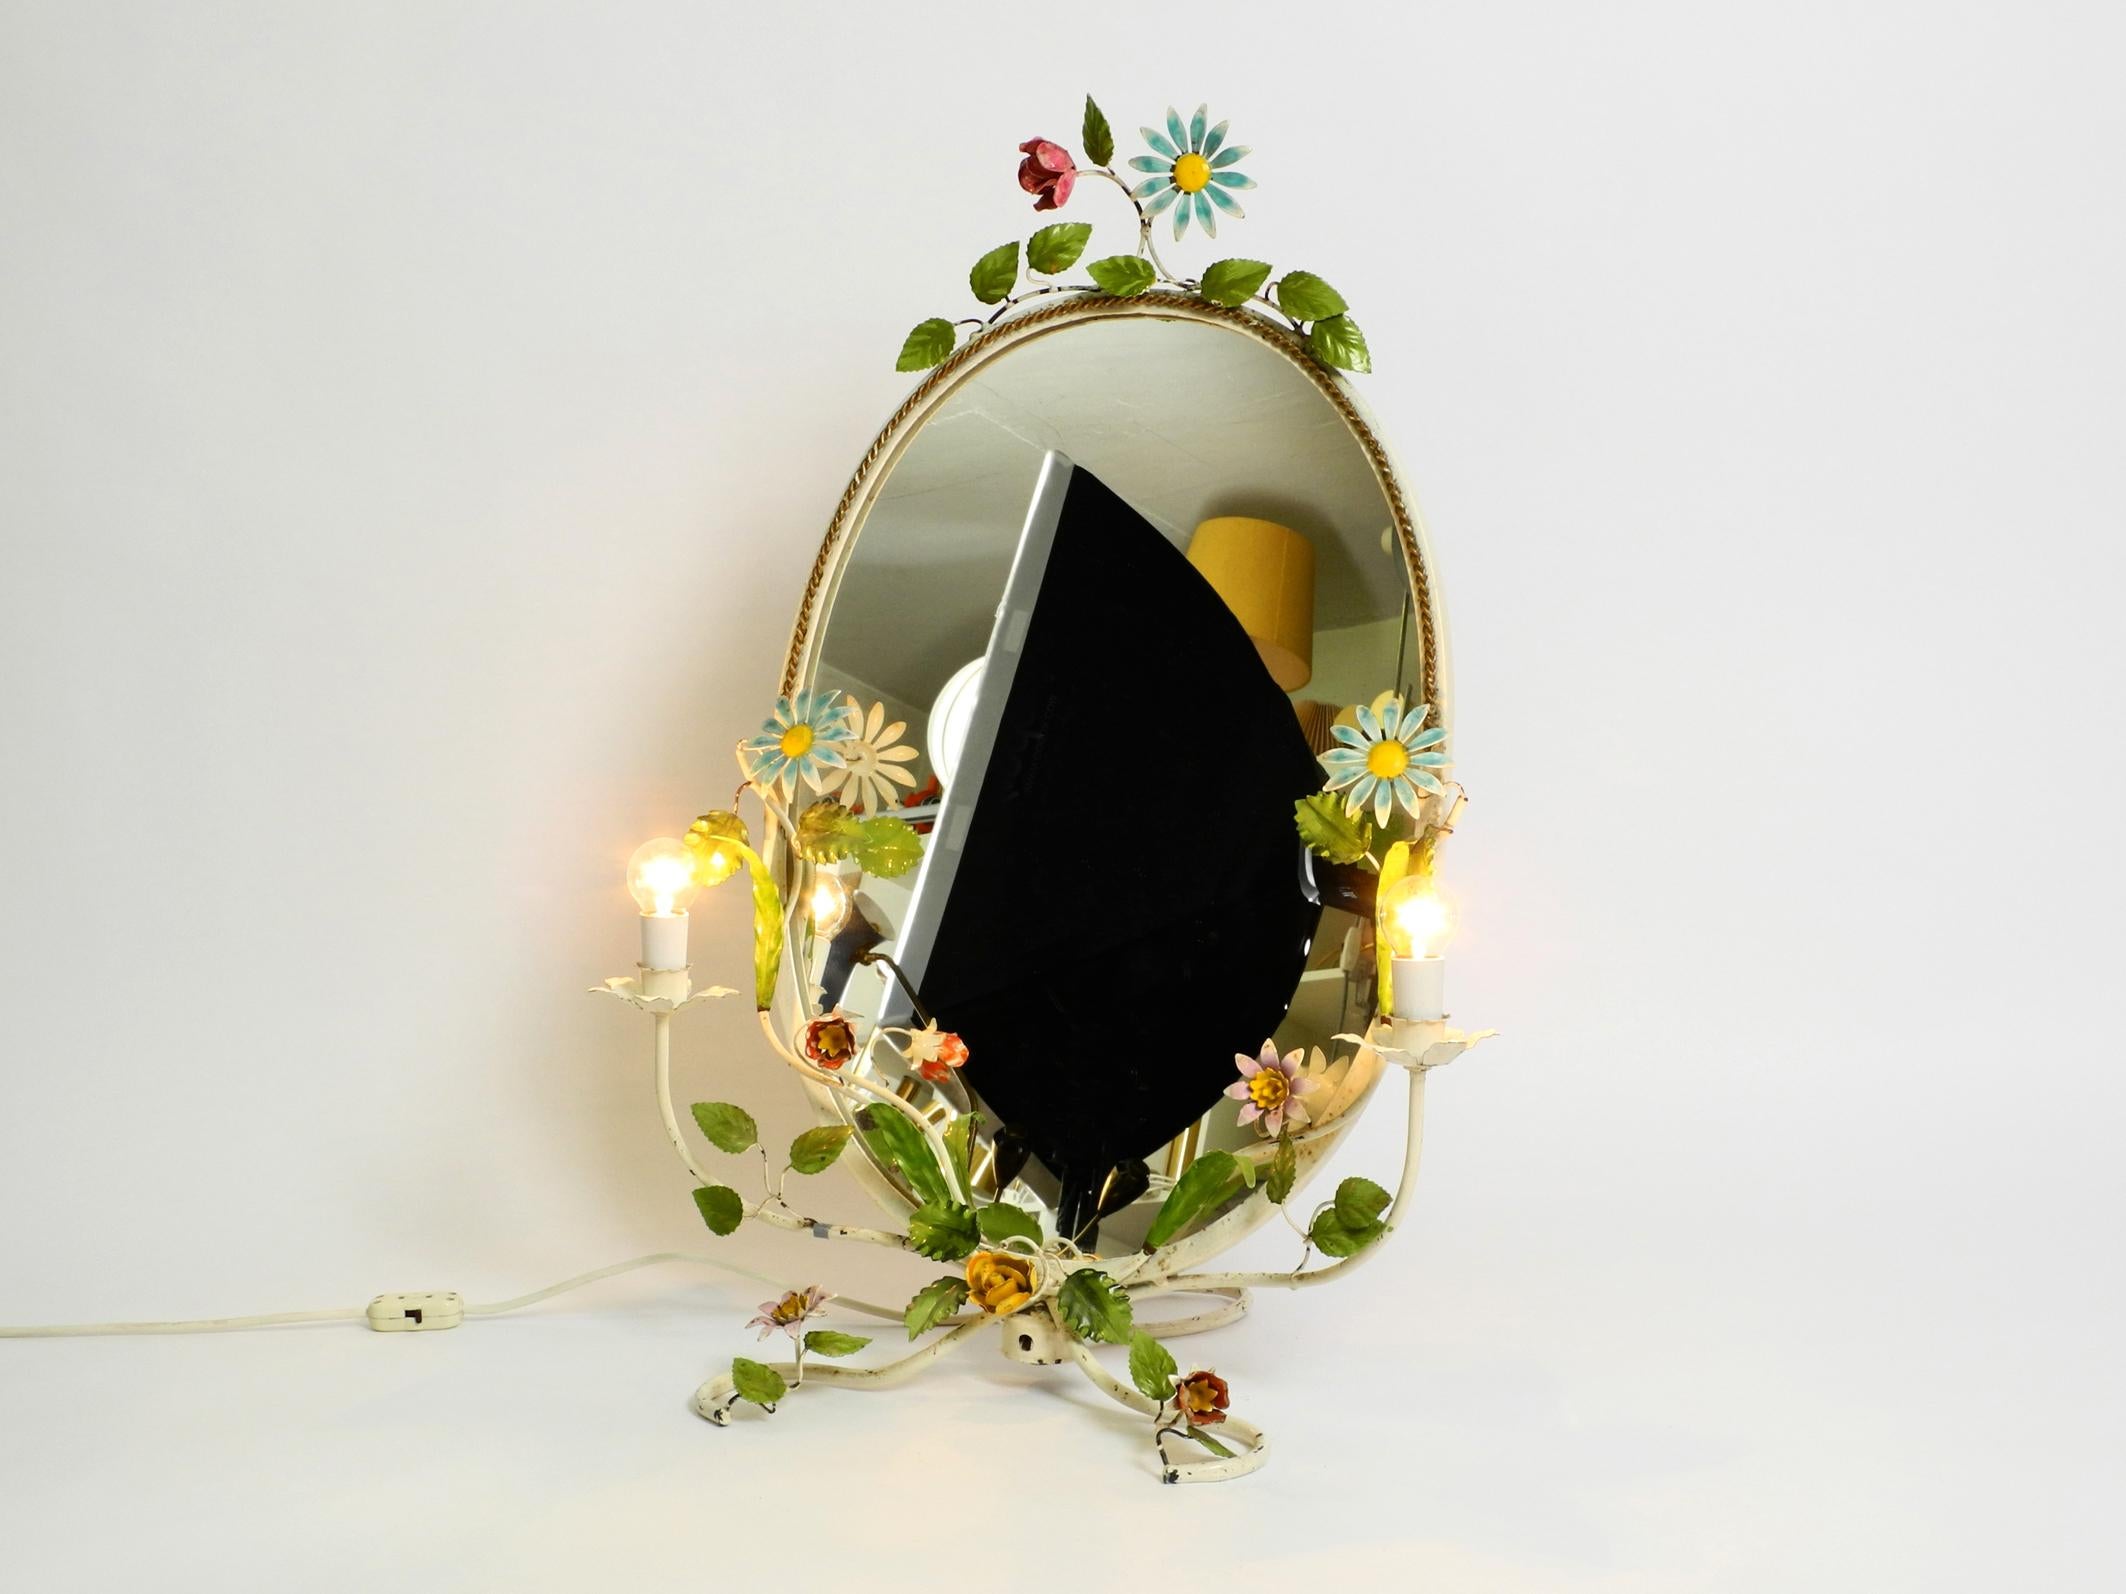 Large, very rare, beautiful floral metal table beauty mirror. Made in Italy in the 1960s.
Very elaborate and stunning design with many details.
All leaves and flowers are hand painted.
An absolute highlight in every interior.
100% original